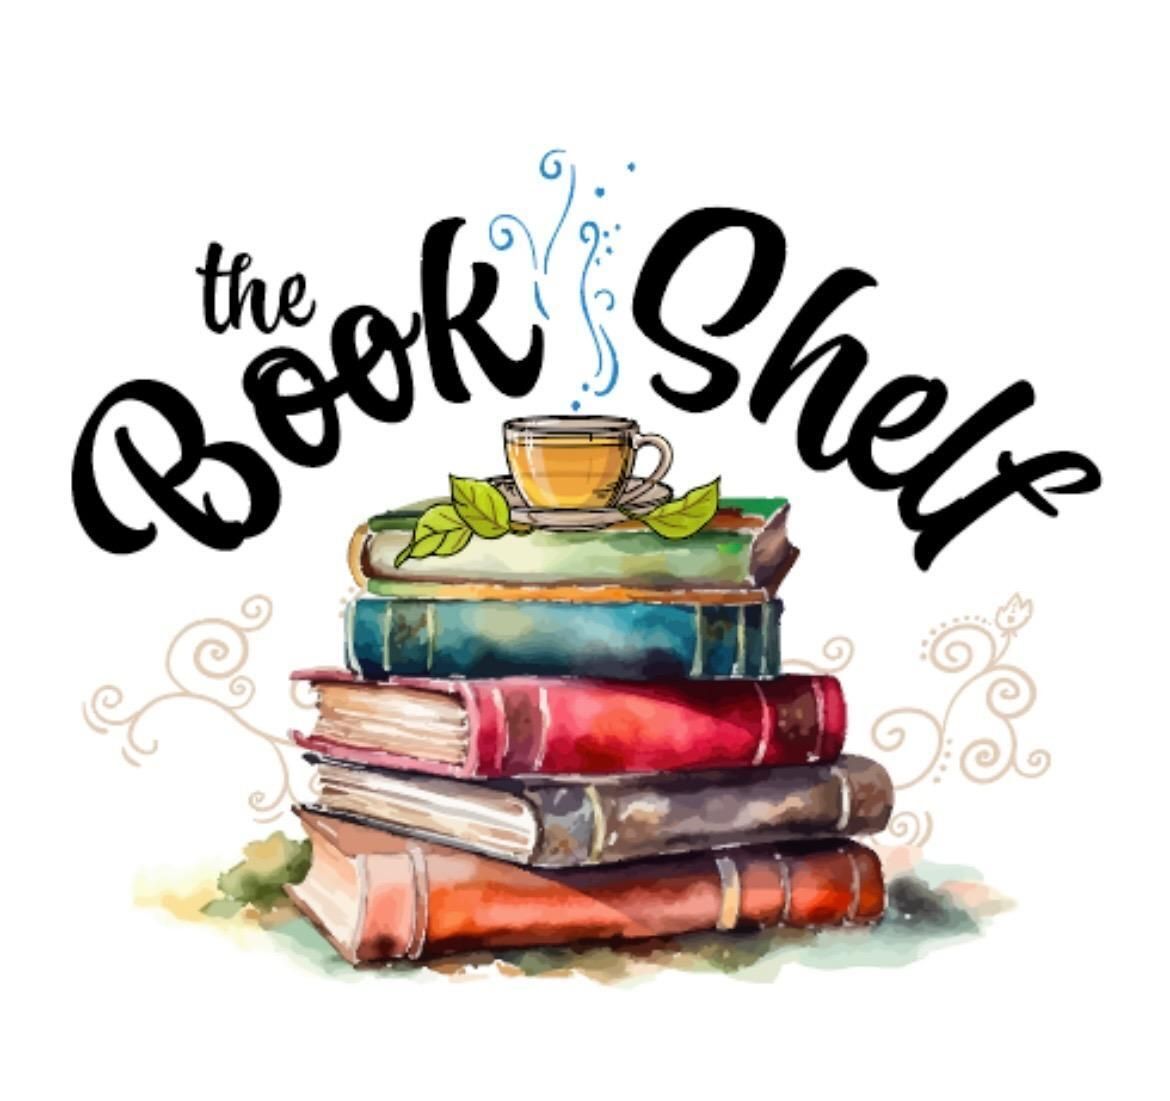 The Bookshelf logo is a stack of books with a mug sitting on top